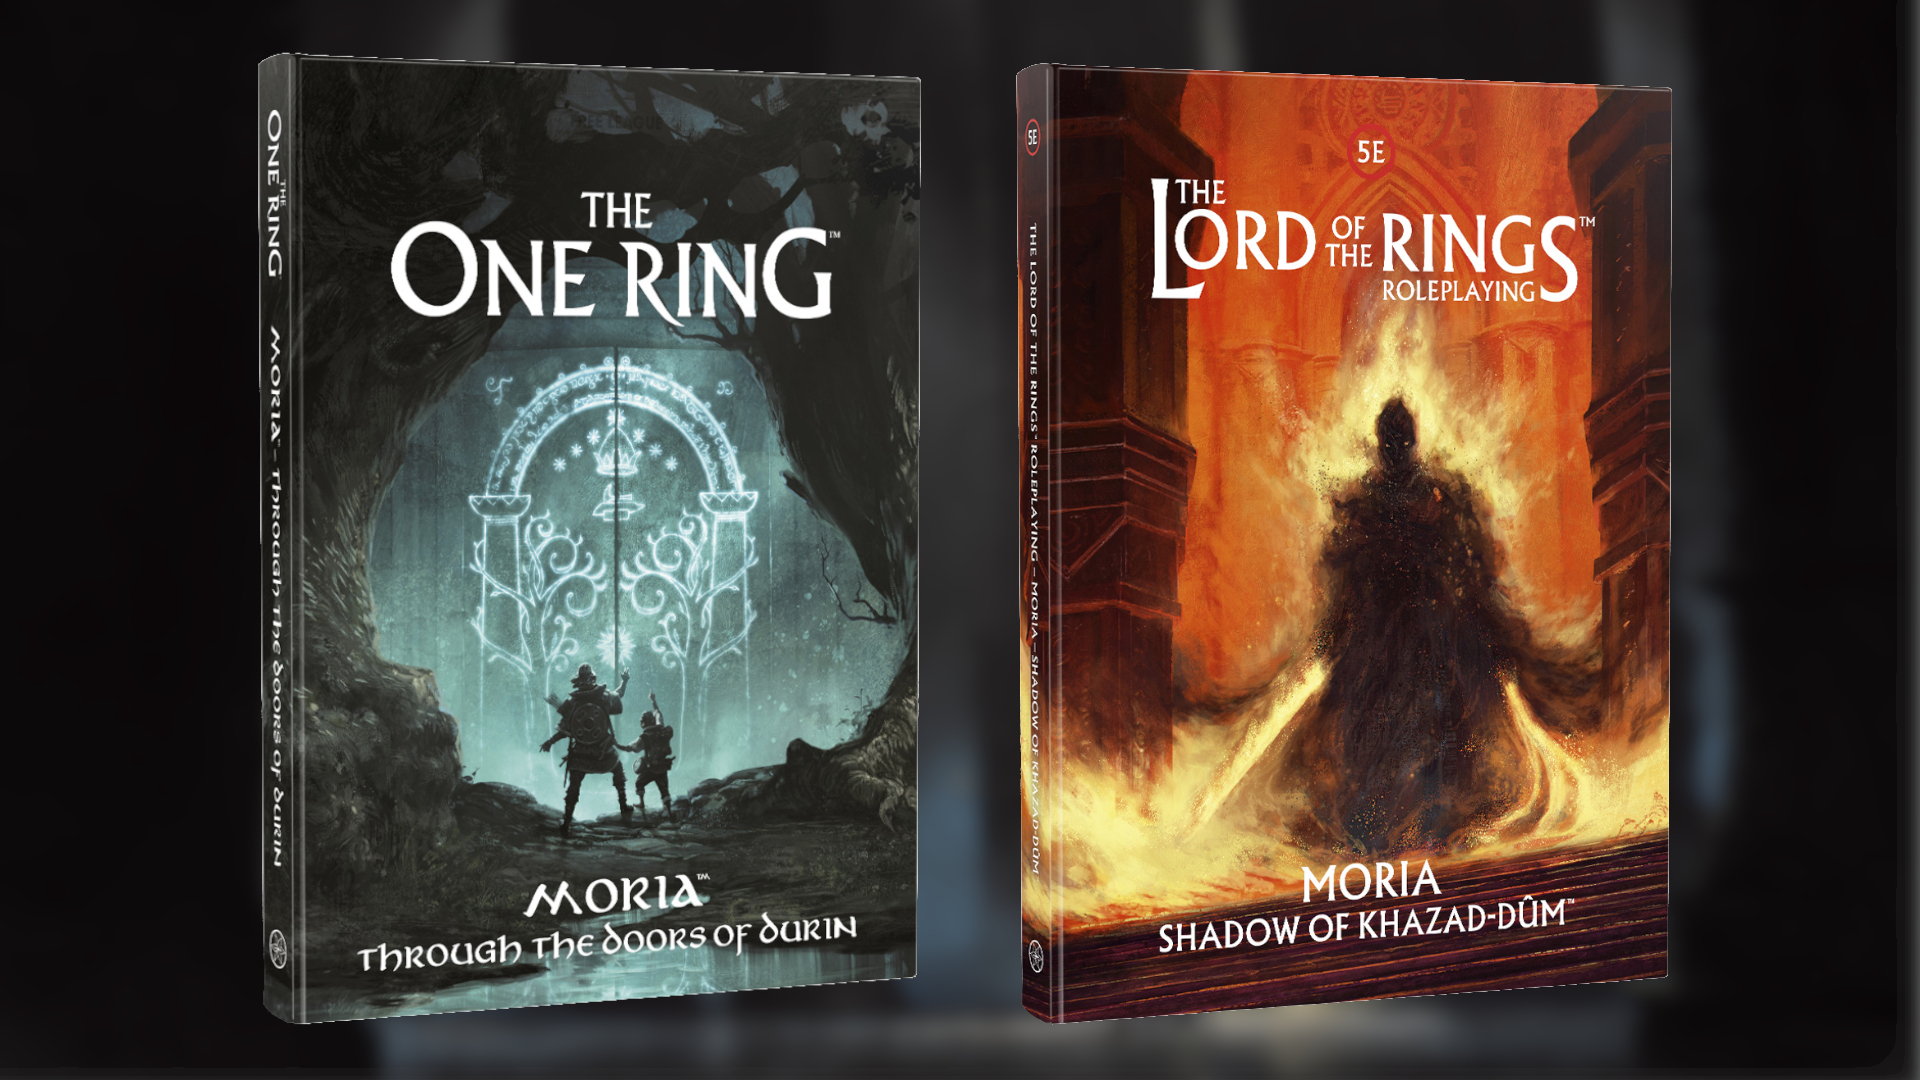 Moria - Through the Doors of Durin and Moria - Shadow of Khazad-dum covers